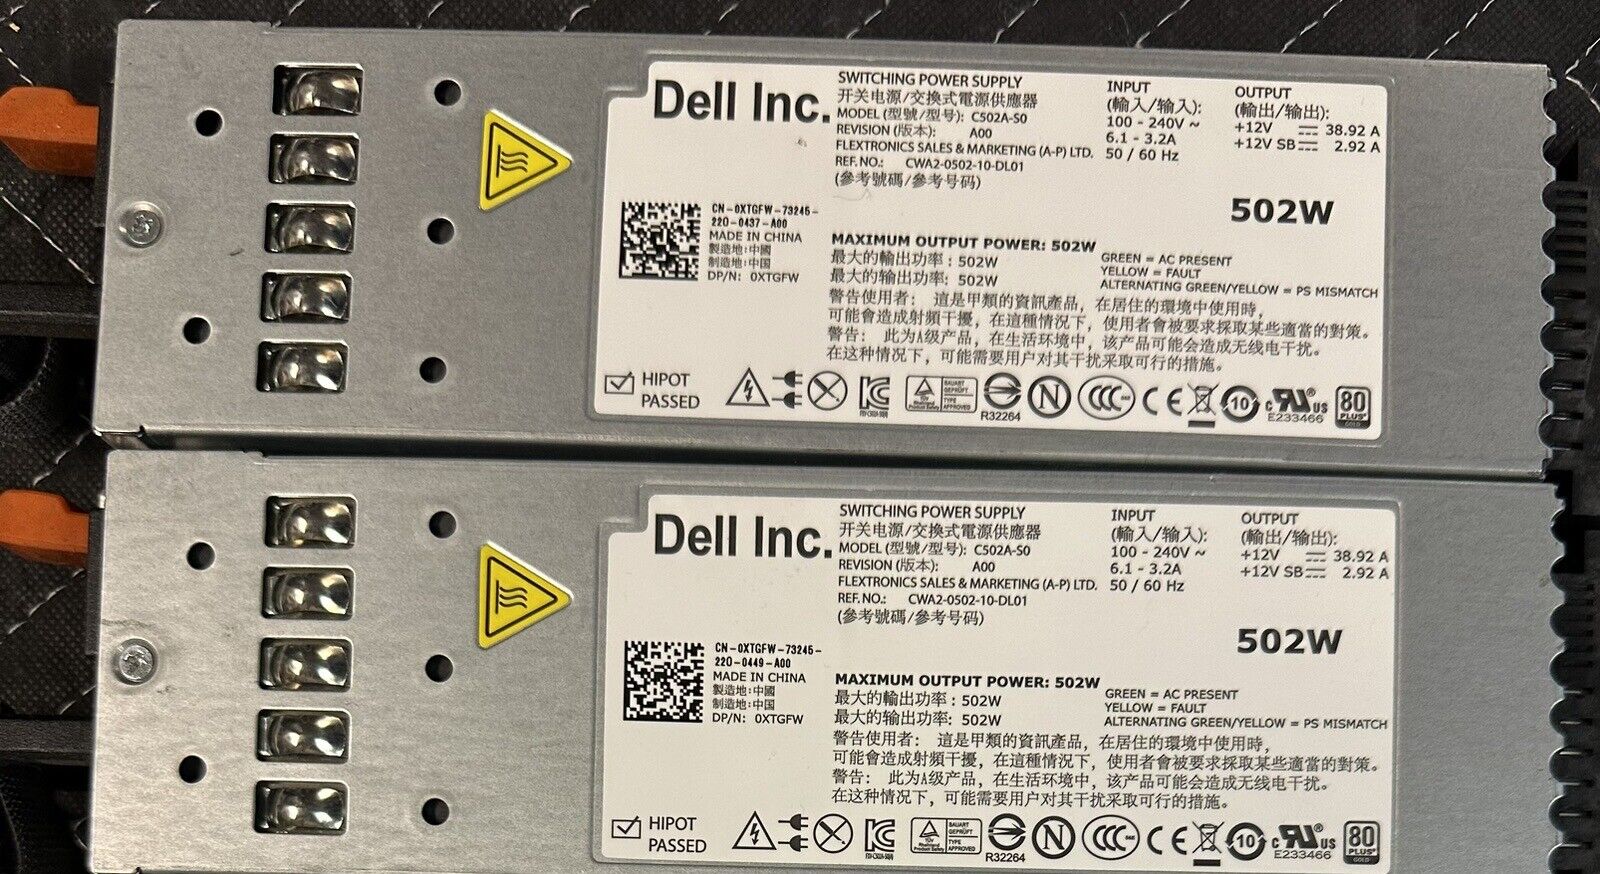 (Lot of 2) New Pull Dell 502 W Power Supplies PowerEdge R610 DP/N XTGFW C502A-S0